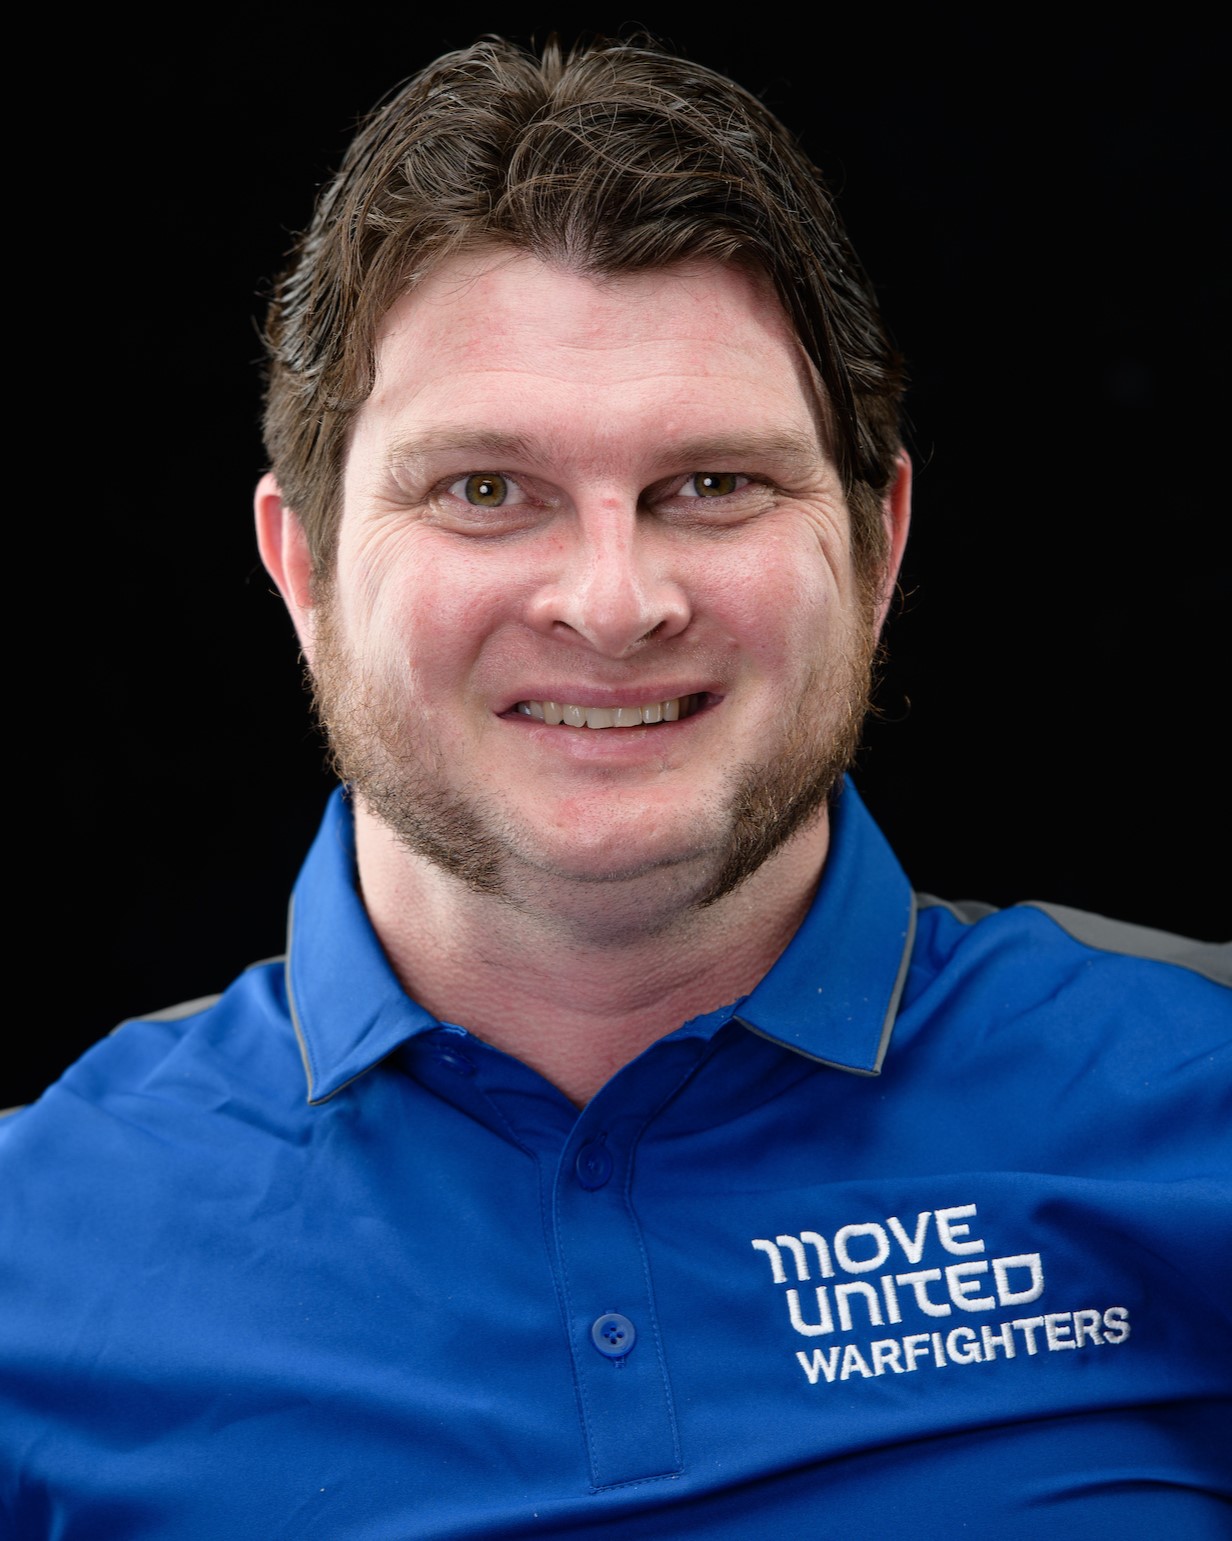 Portrait of Timothy Brown, wearing a blue Move United Warfighters polo